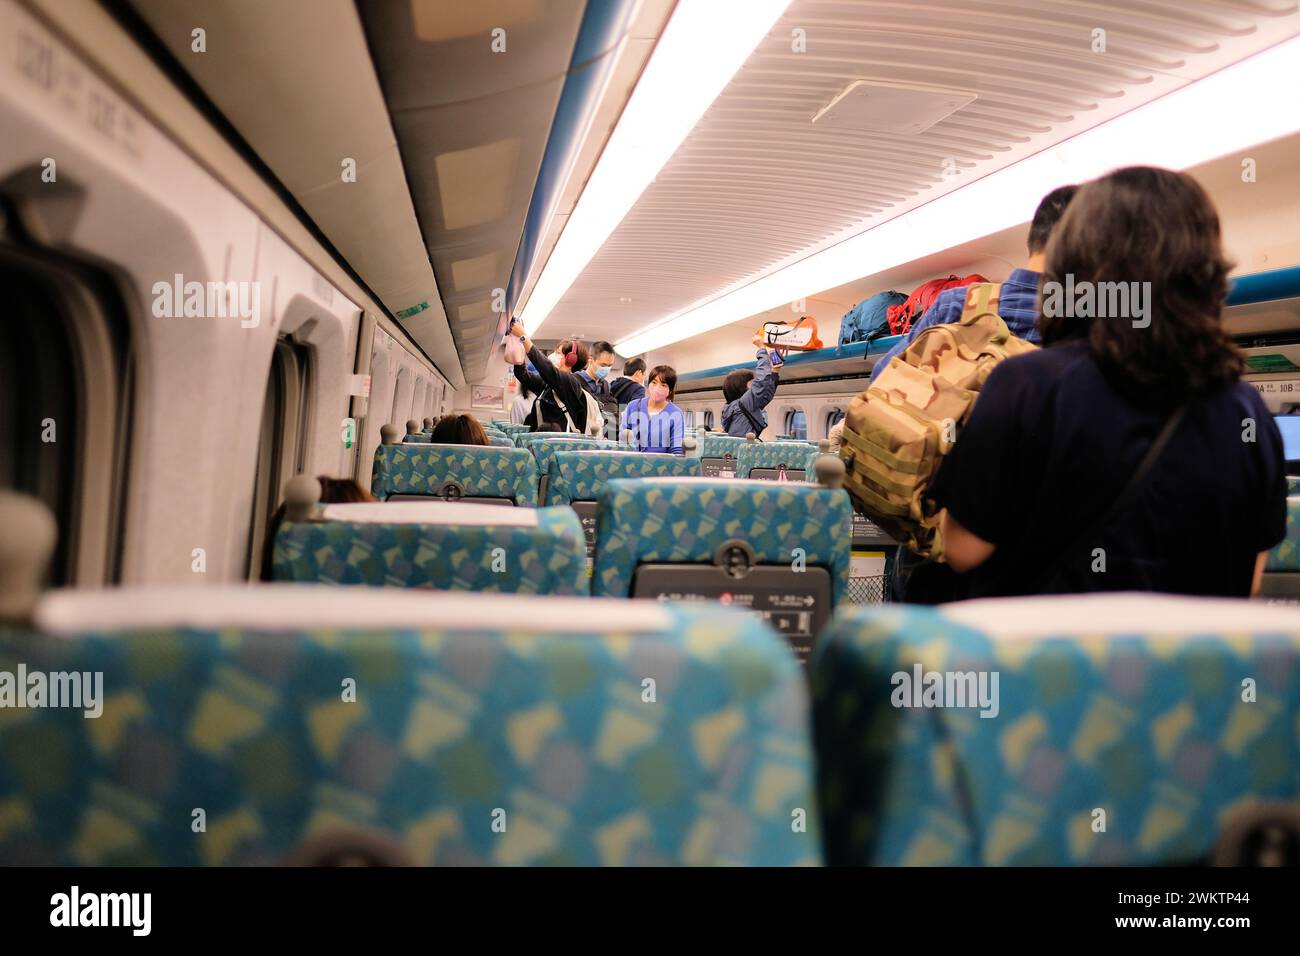 Passengers on board a THSR 700T high speed train car as they walk through the aisle looking for their seat; Taiwan High Speed Rail Corporation; Taipei Stock Photo